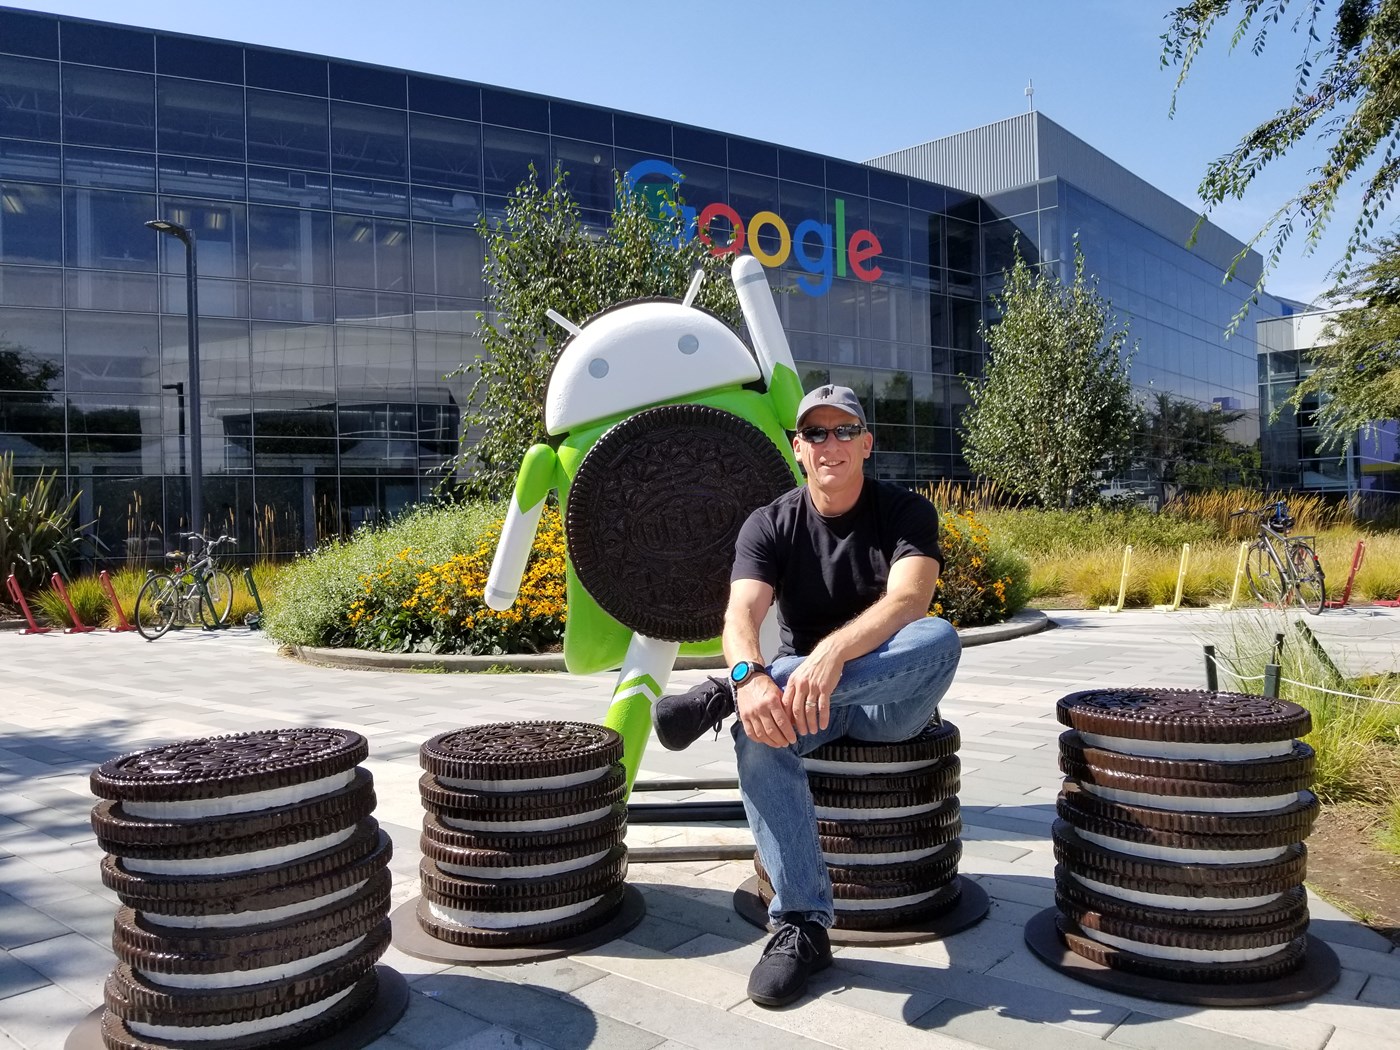 Android co-founder Rich Miner ’86, ’89, ’97 at Google corporate headquarters in Mountain View, Calif., in 2017